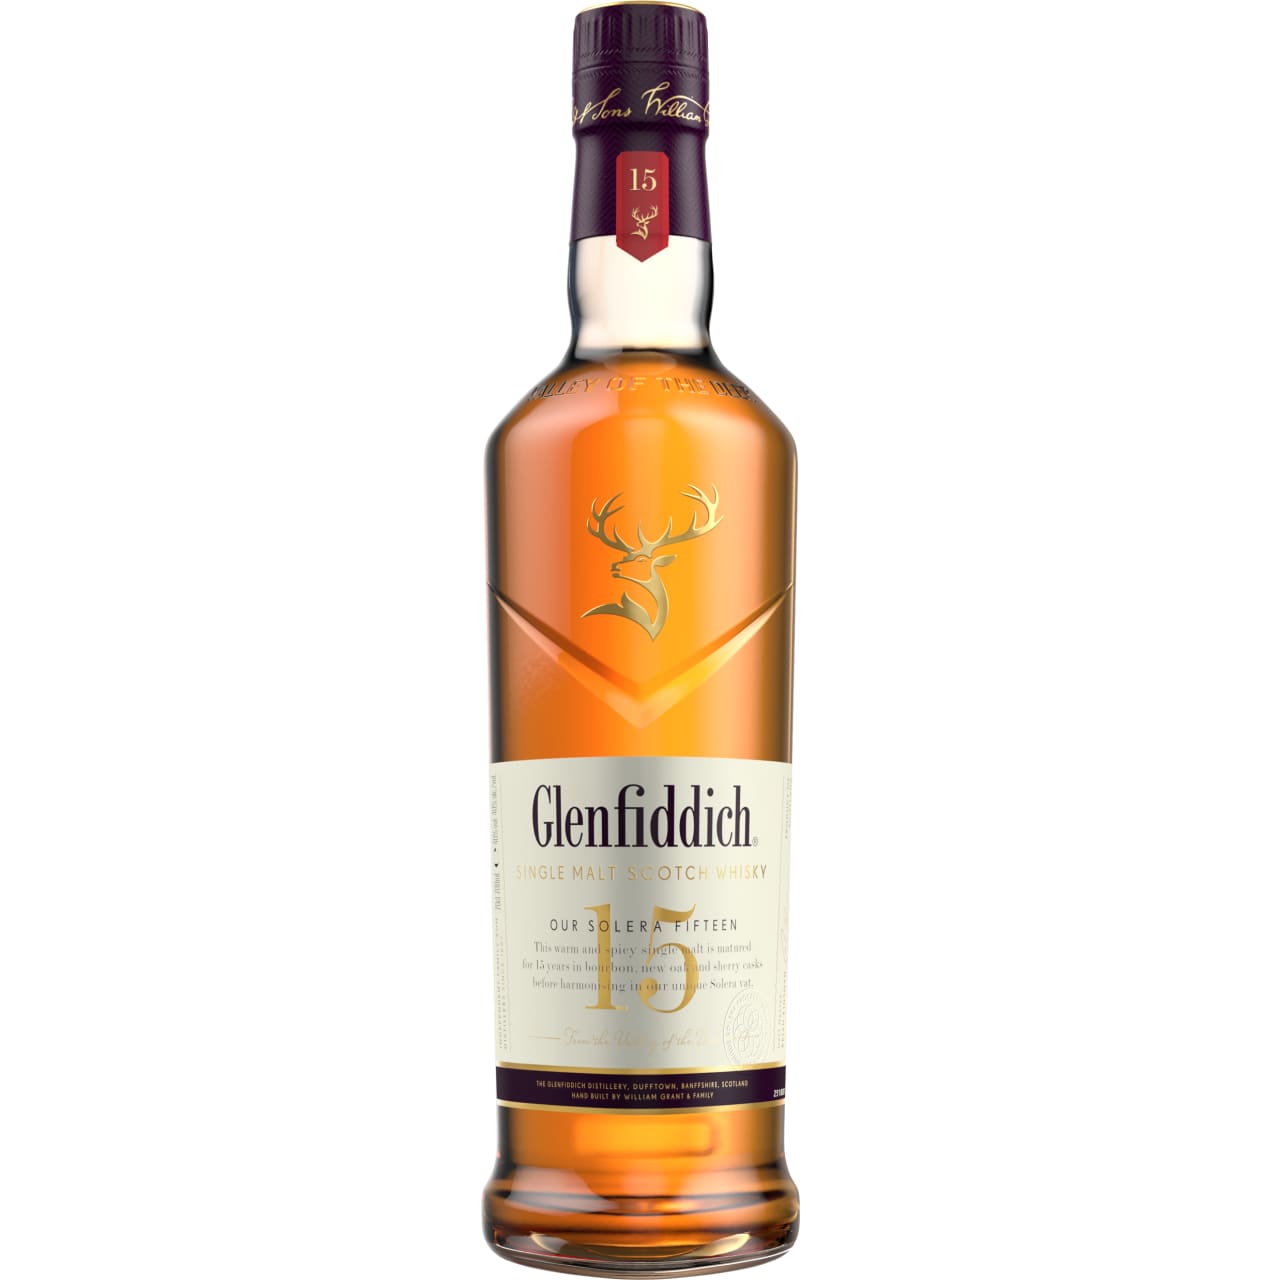 Exemplifying the Glenfiddich family’s tradition of innovation, their 15 Year Old expression is created using a technique pioneered by their Malt Master and its warm, spicy flavours are transformed with the alchemy of the Solera Vat. Aged in European oak sherry casks and new oak casks, the whisky is mellowed in the unique Solera Vat, a large oak tun inspired by the sherry bodegas of Spain and Portugal.